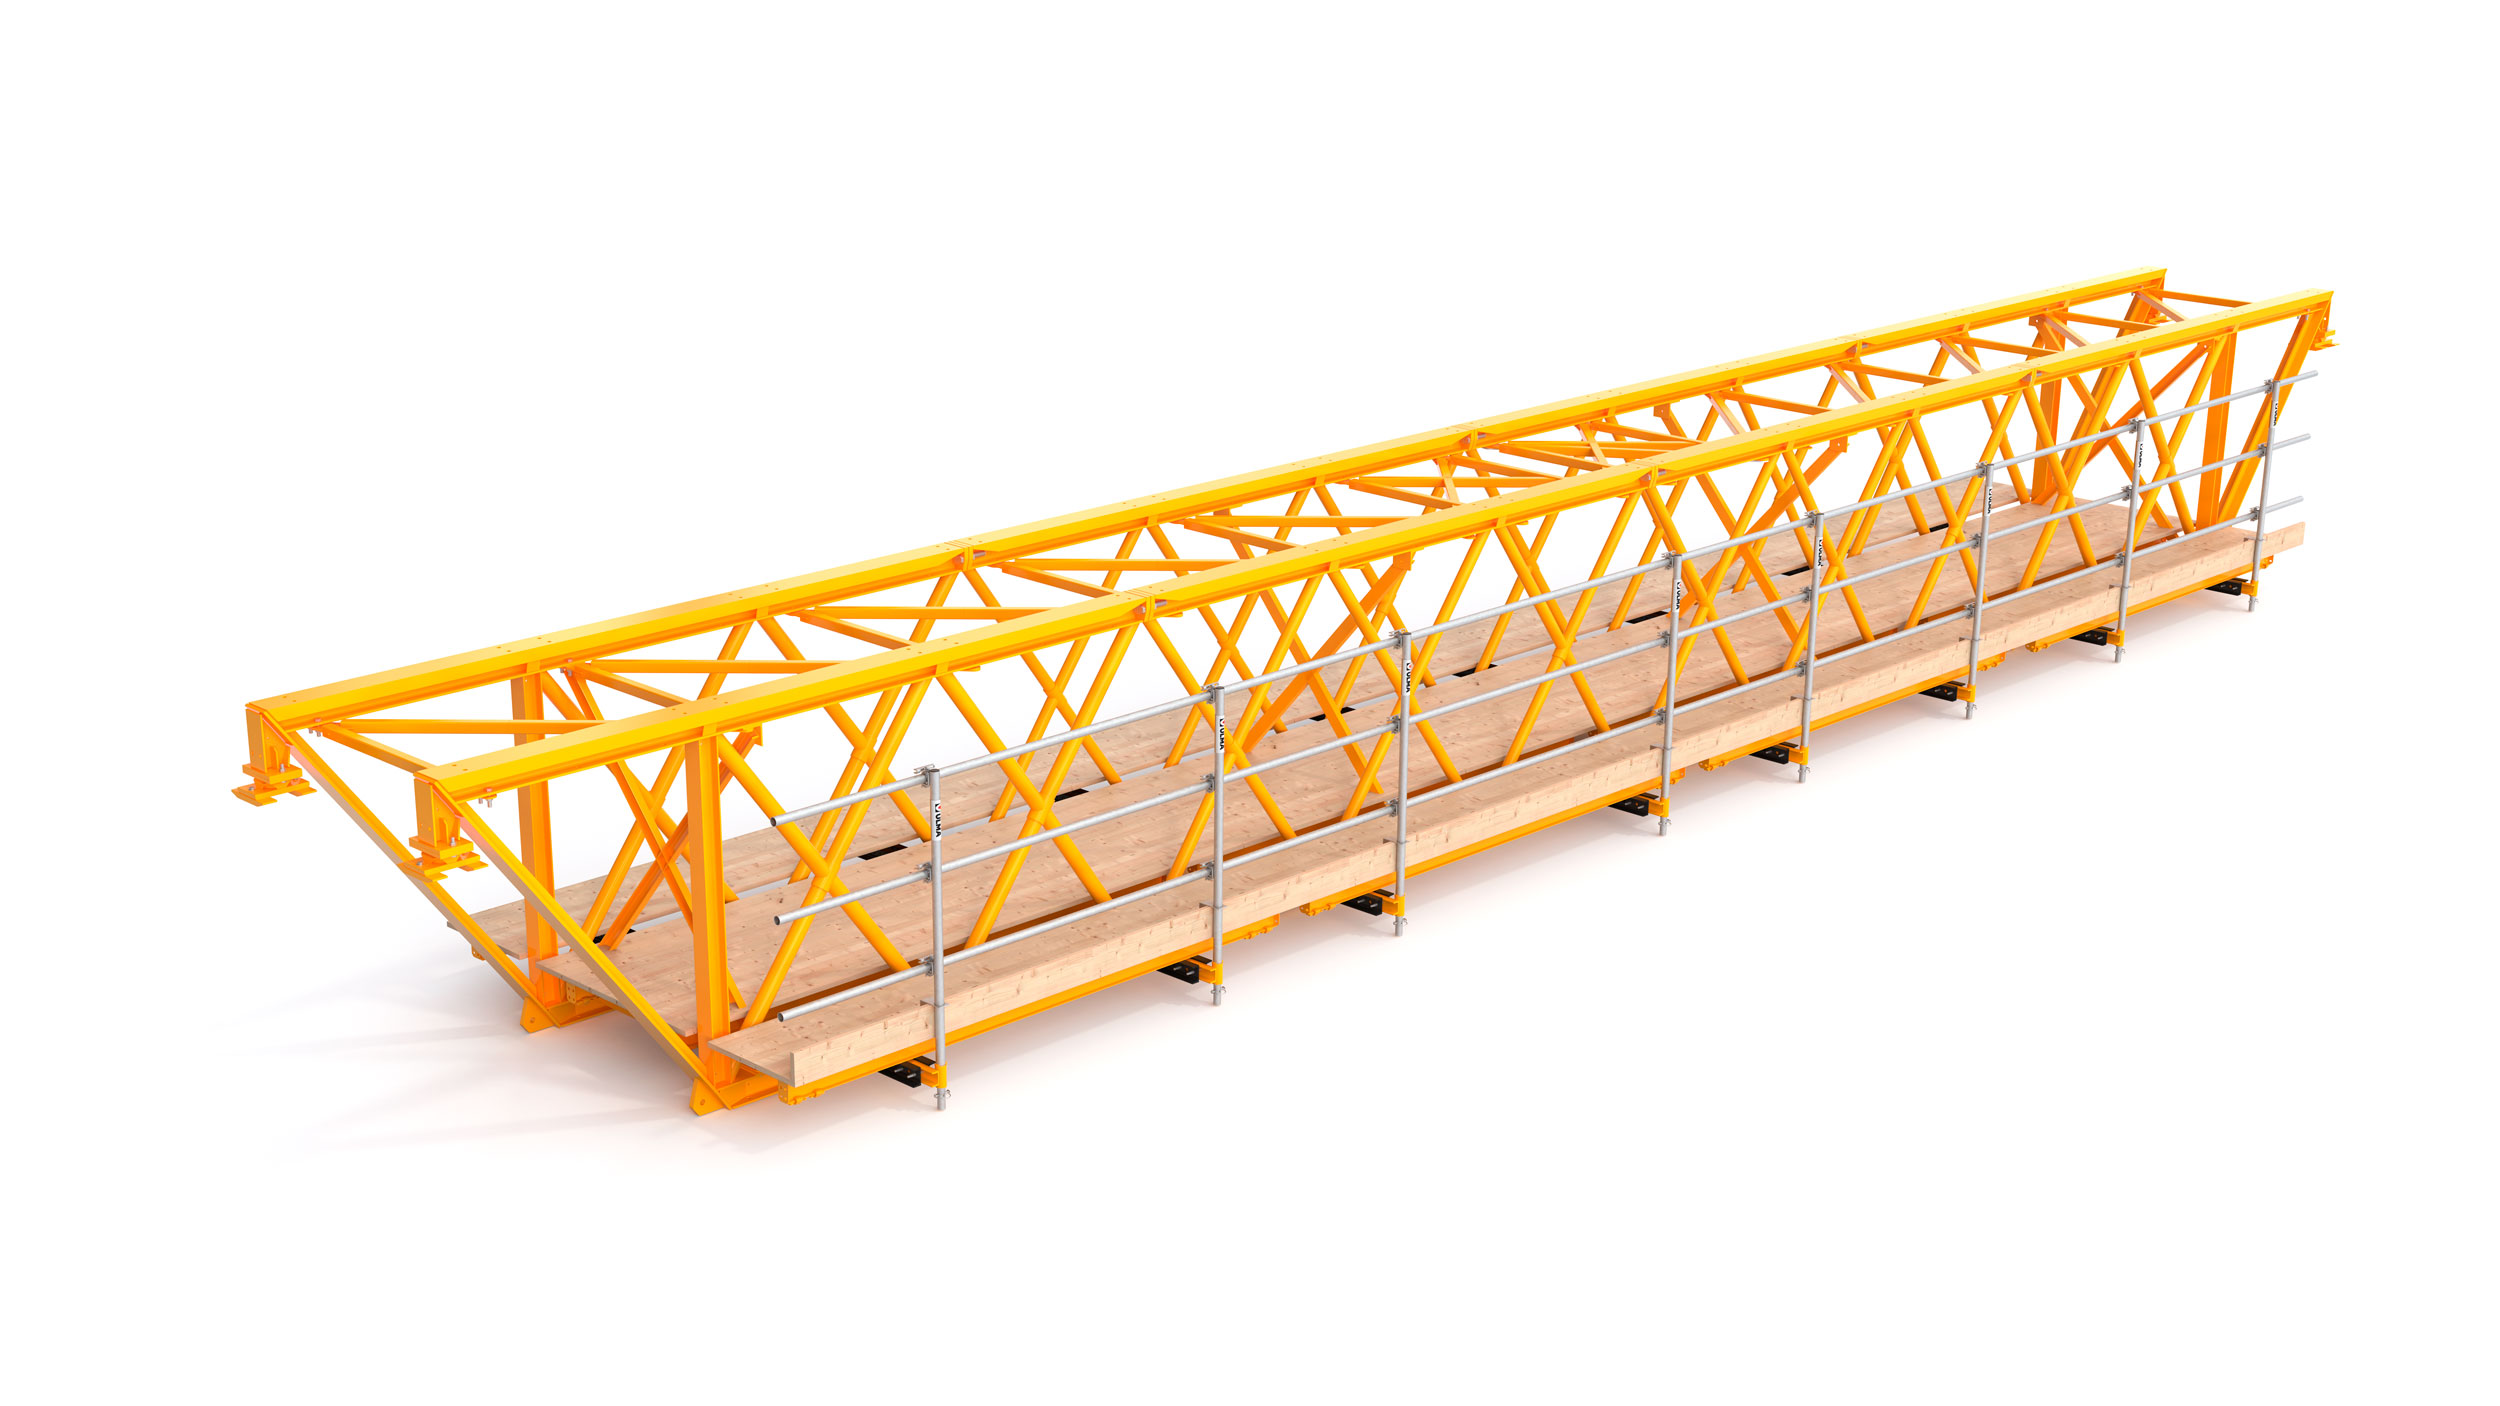 Modular truss system for large span concrete constructions. Highlights: minimum number of ground shorings, easy erection and handling. Mainly oriented towards civil engineering.